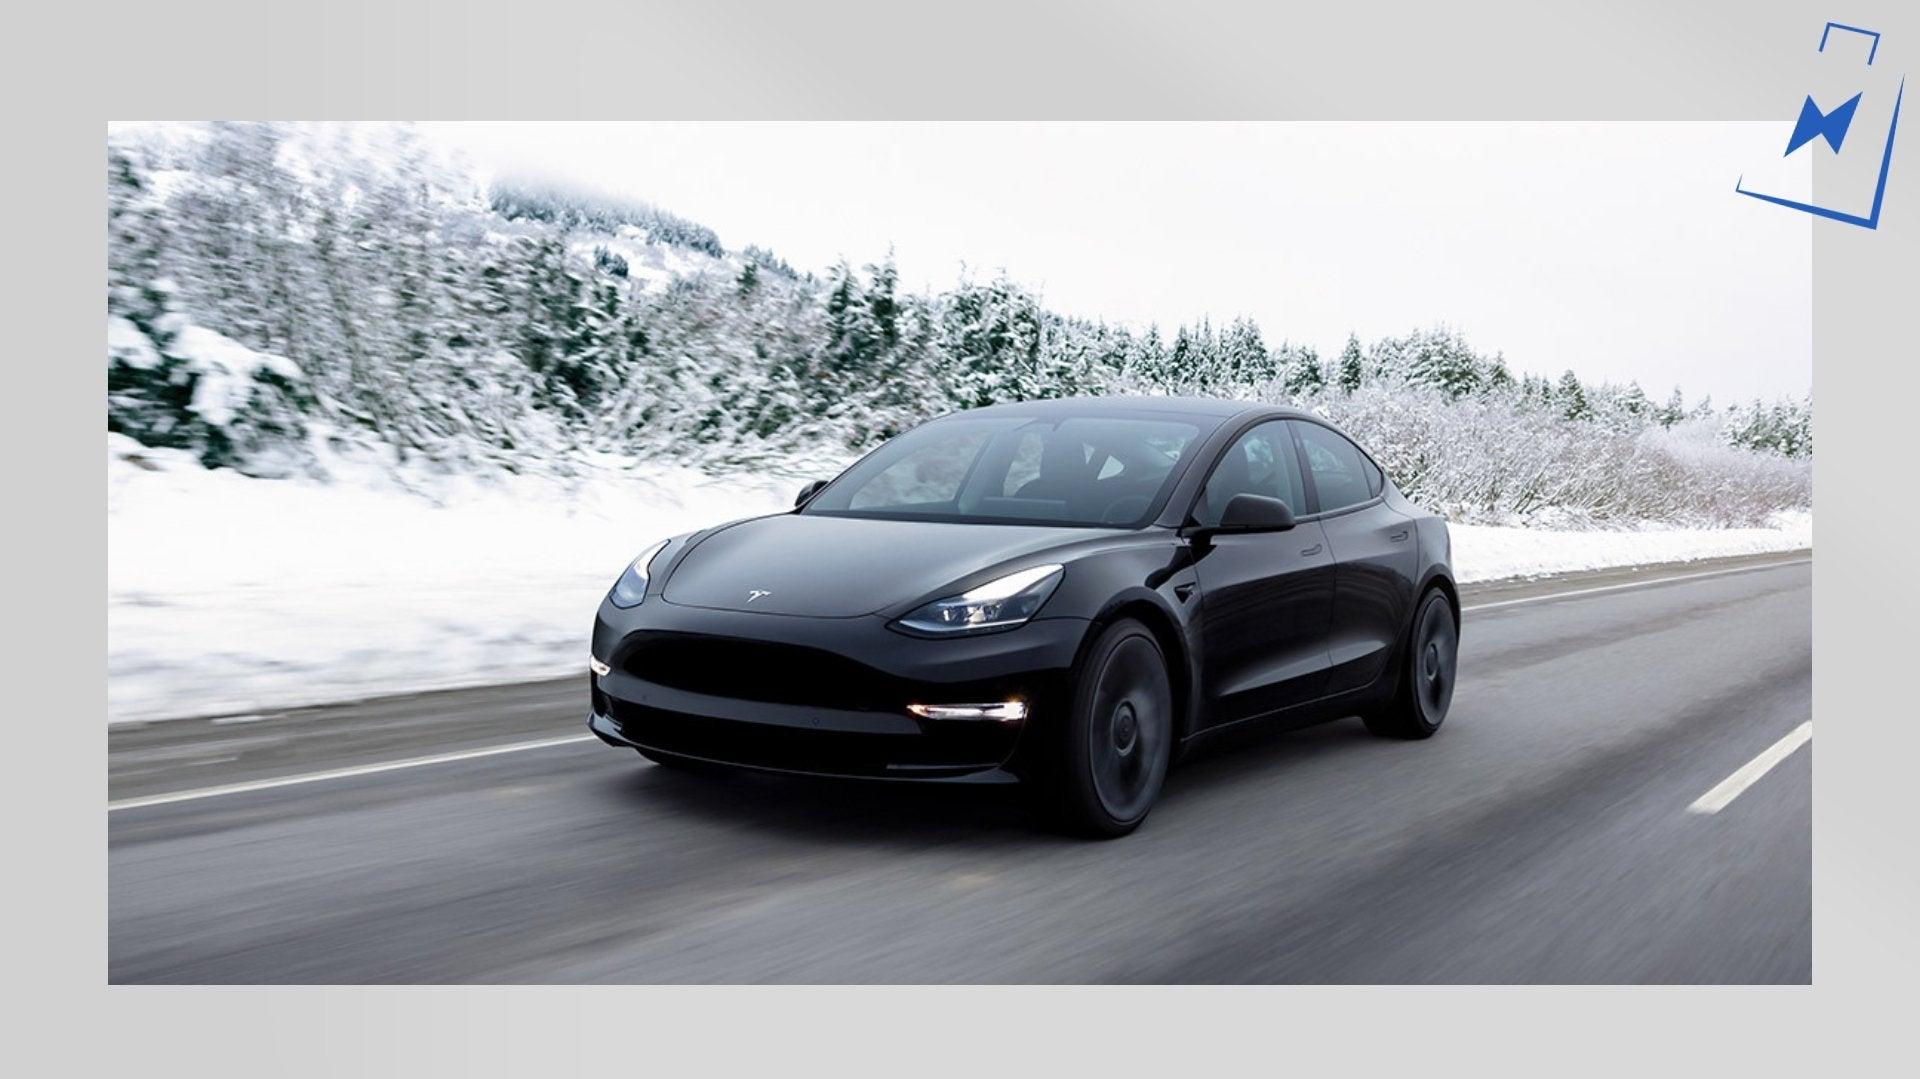 New Tesla Model Variant For Europe Rear Wheel Drive With Large